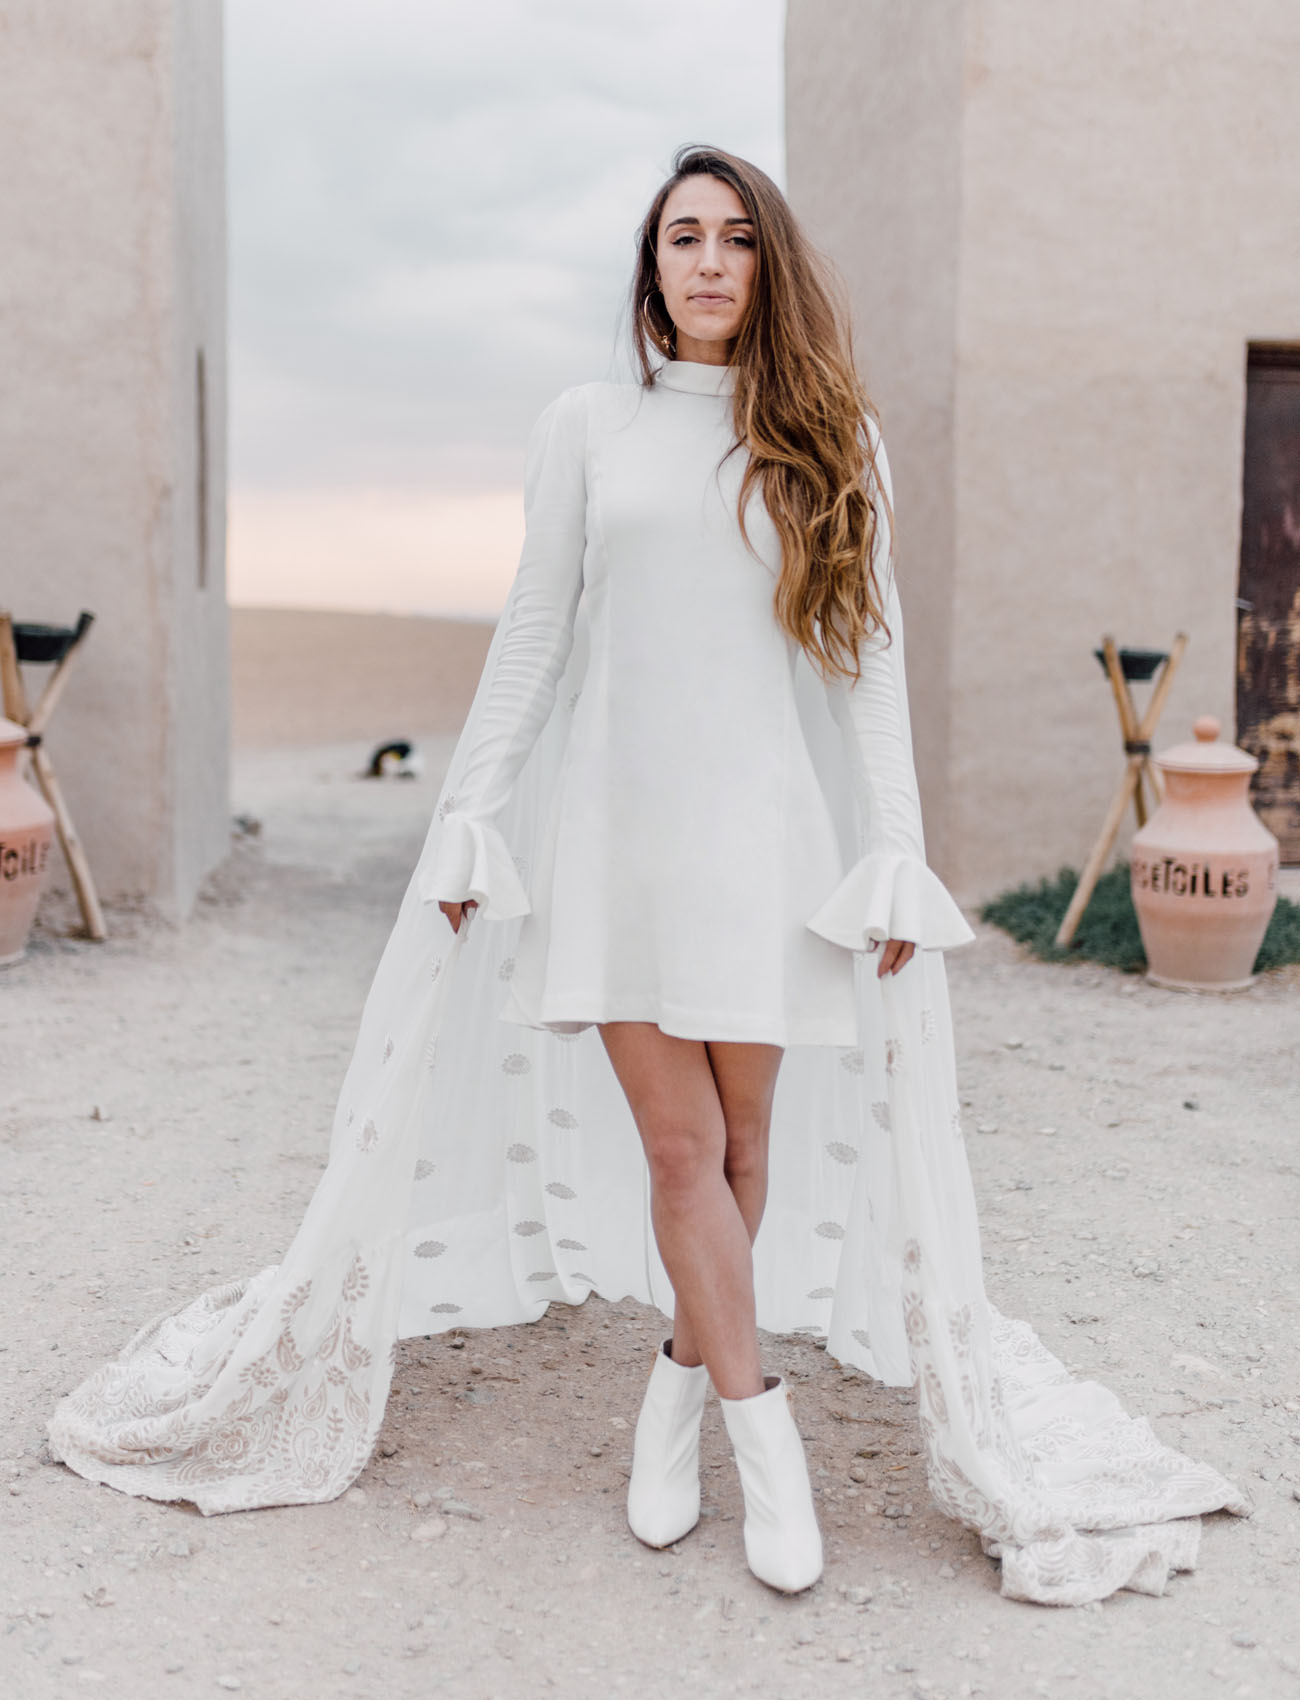 The Coolest Wedding Boots for Your Wedding Day or Elopement